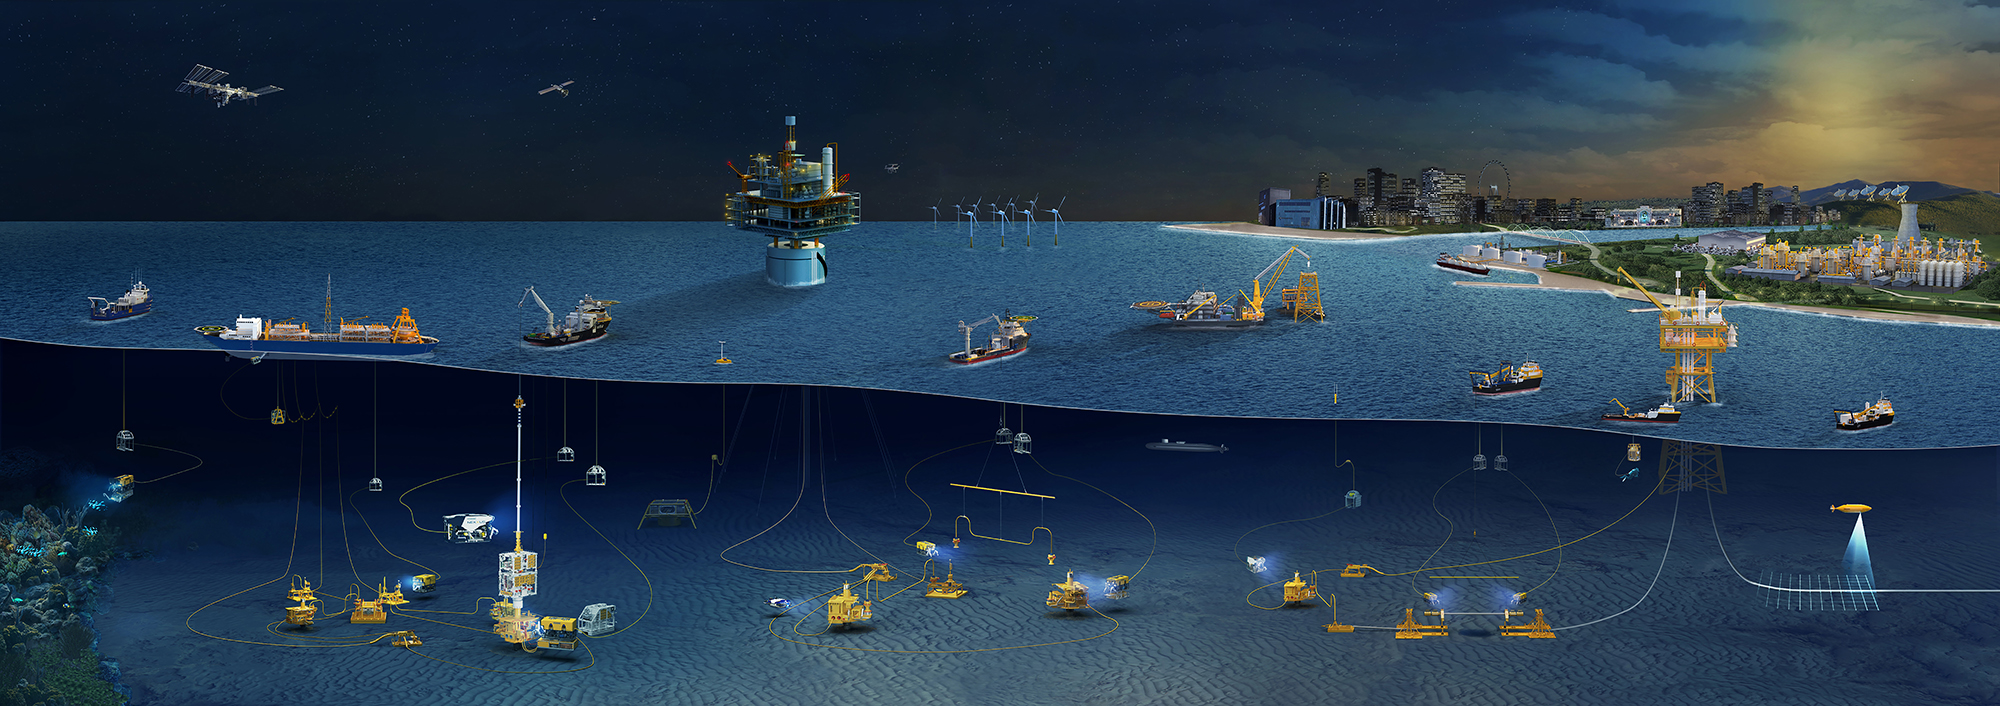 Offshore Seabed Units